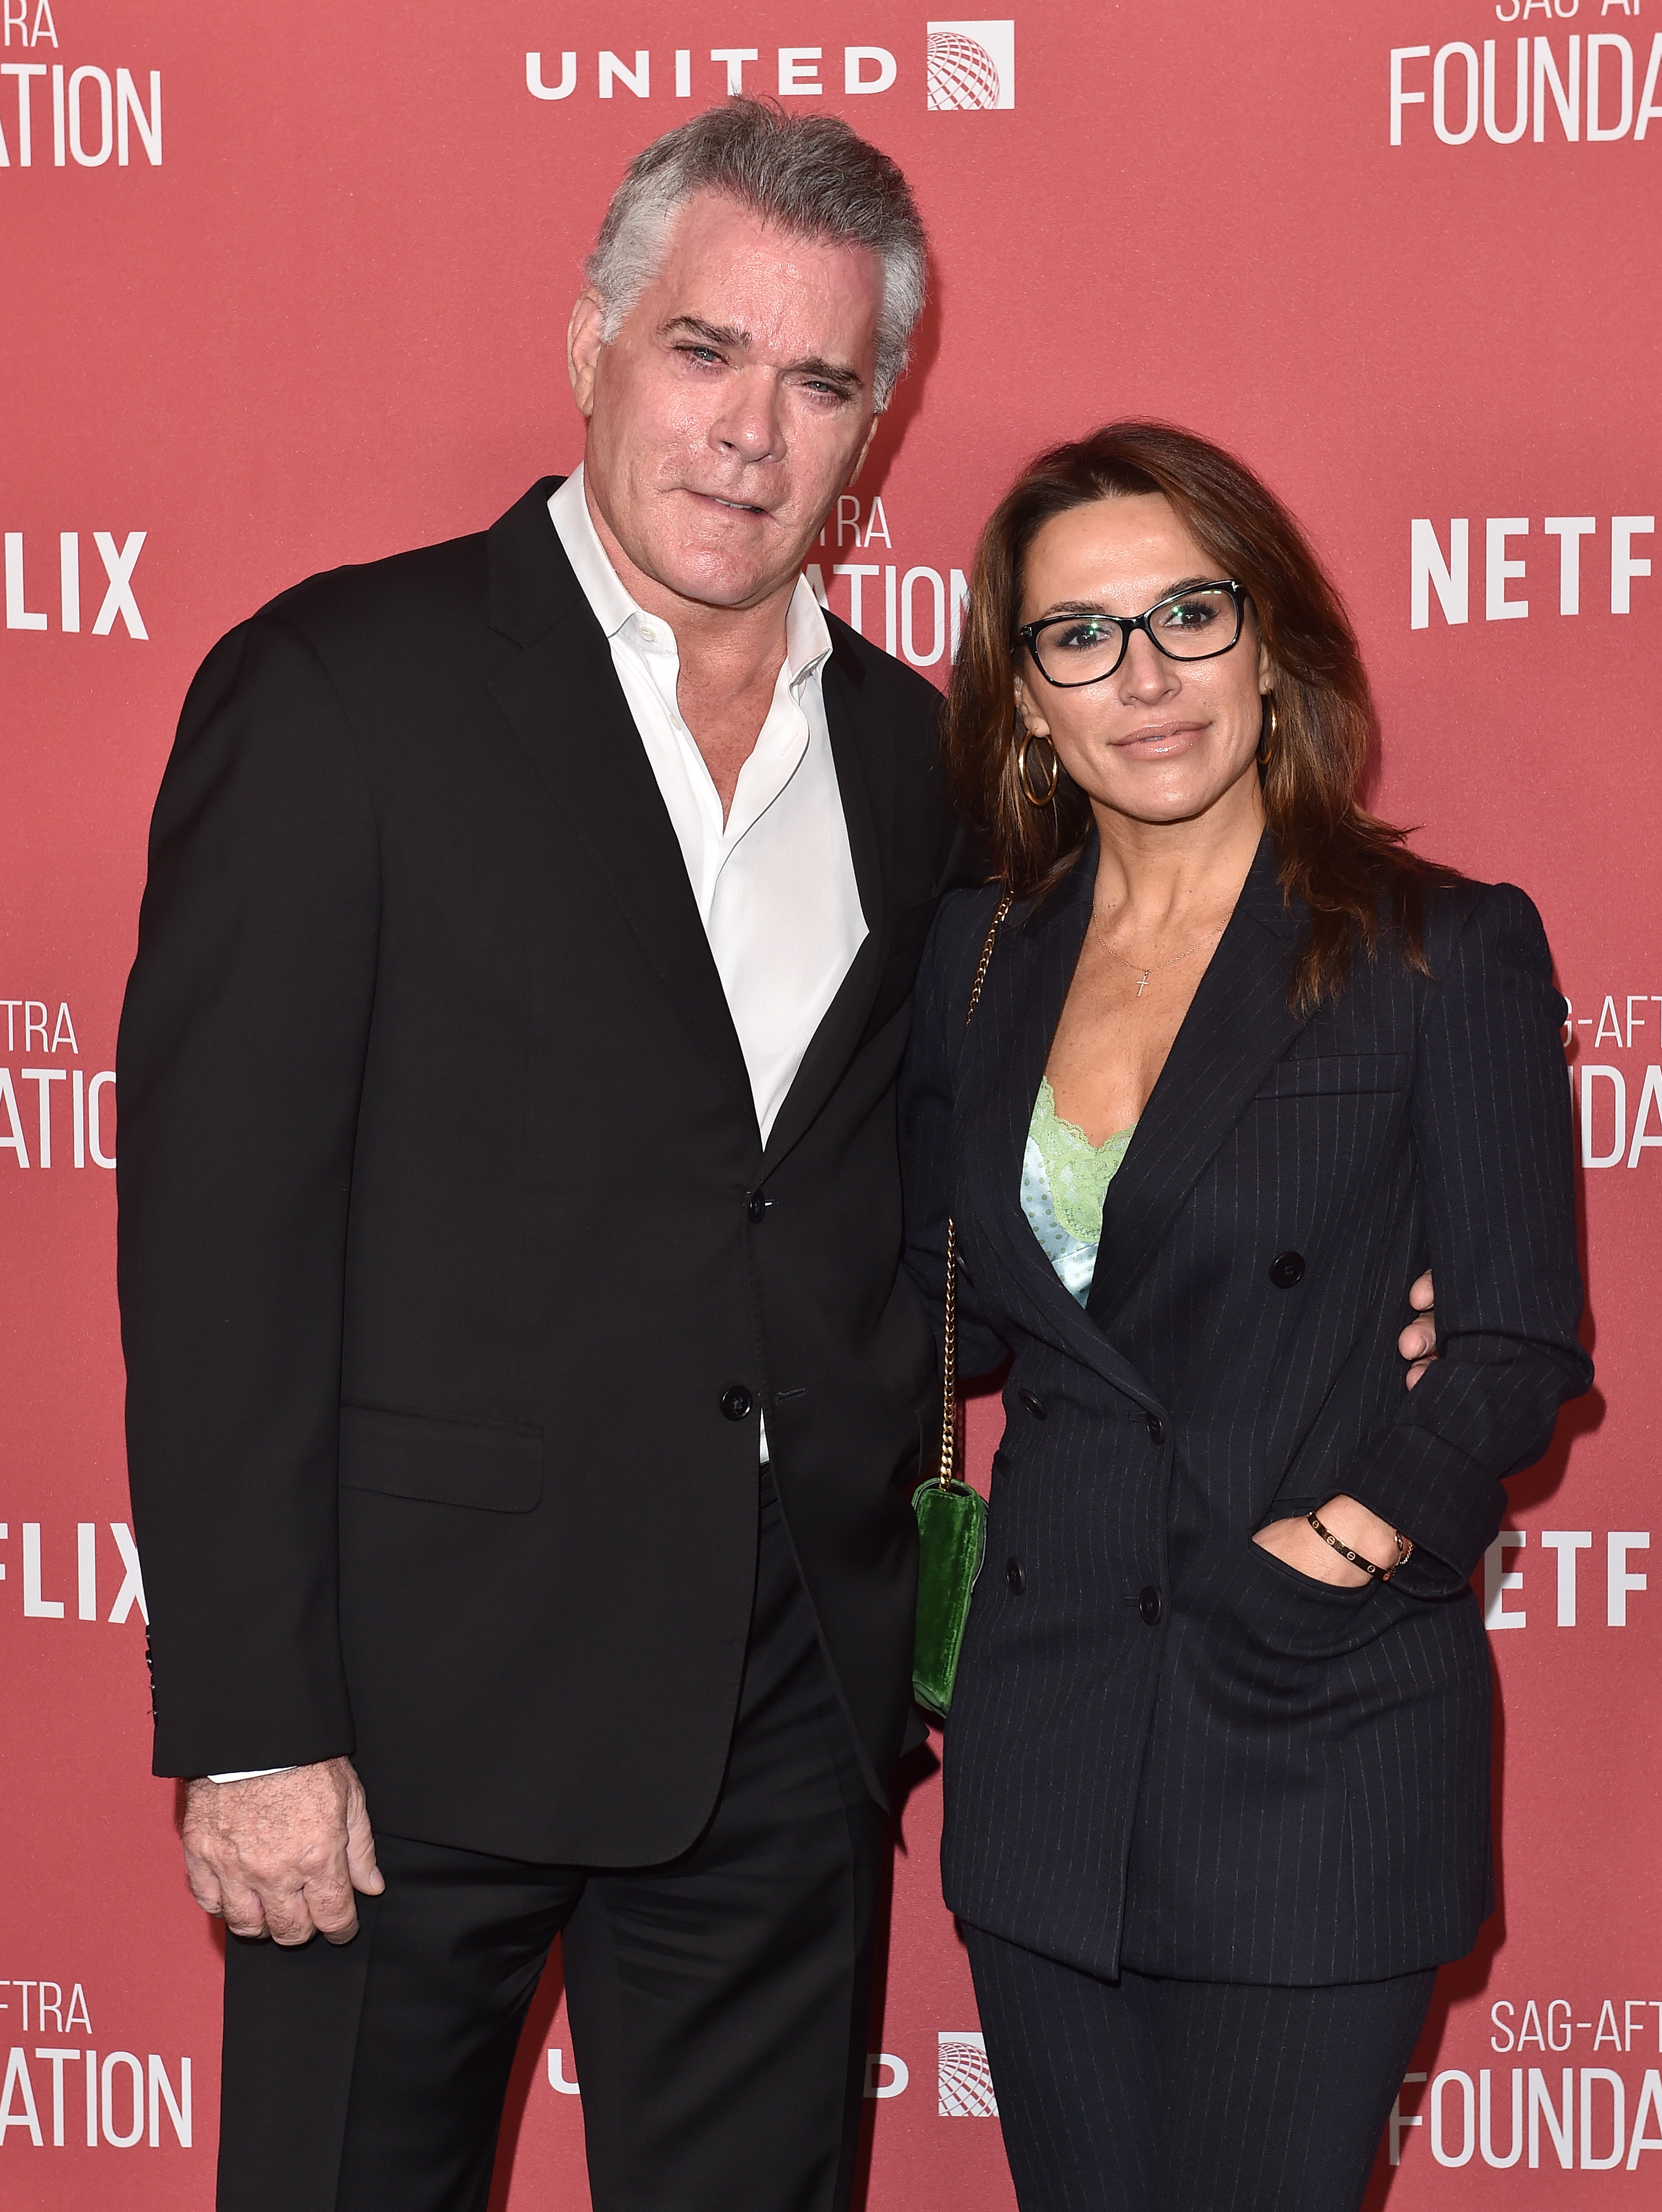 Ray Liotta and Silvia Lombardo at SAG-AFTRA Foundation Patron of the Artists Awards 2017 on November 9, 2017, in Beverly Hills, California. | Source: Getty Images